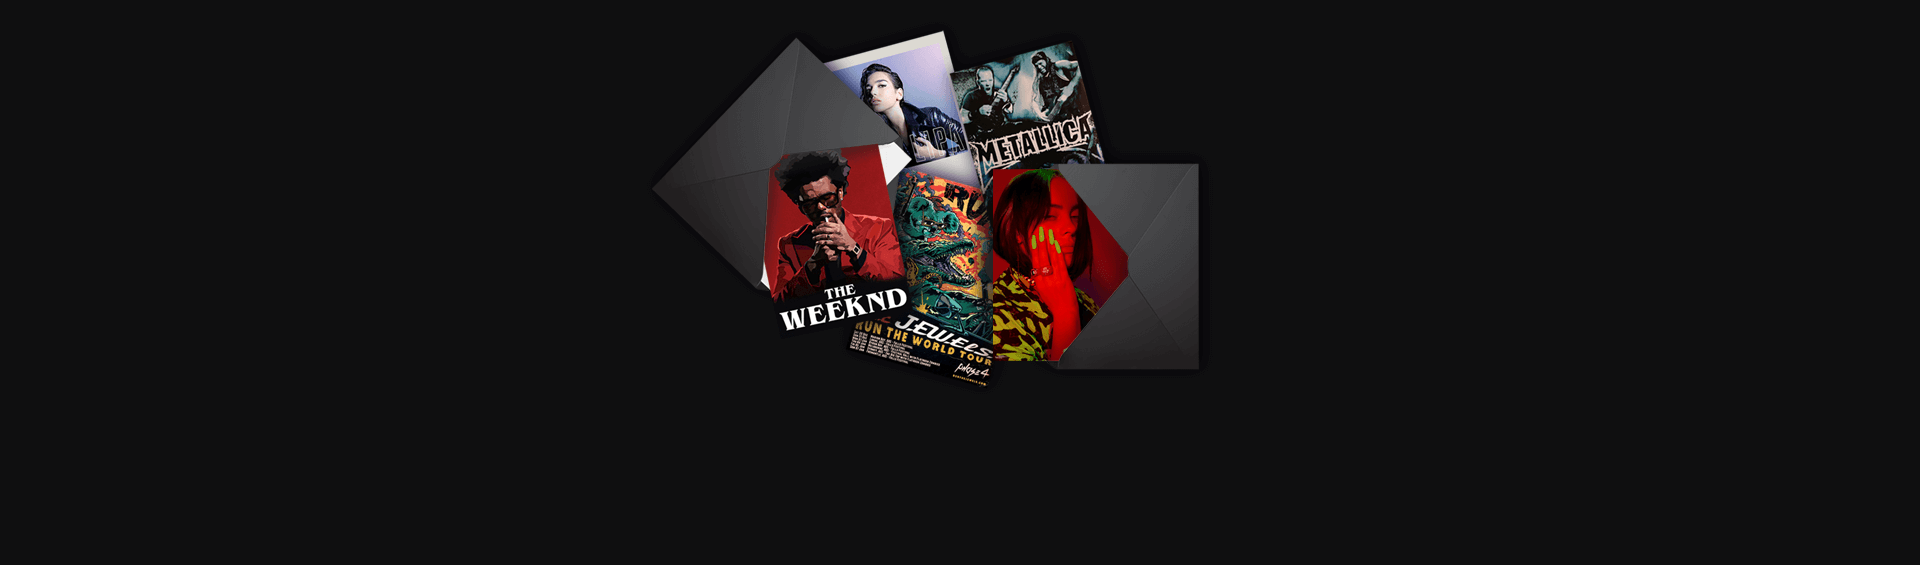 Music Newsletters From The Weeknd, Lana Del Rey, Run The Jewels, and Other Artists